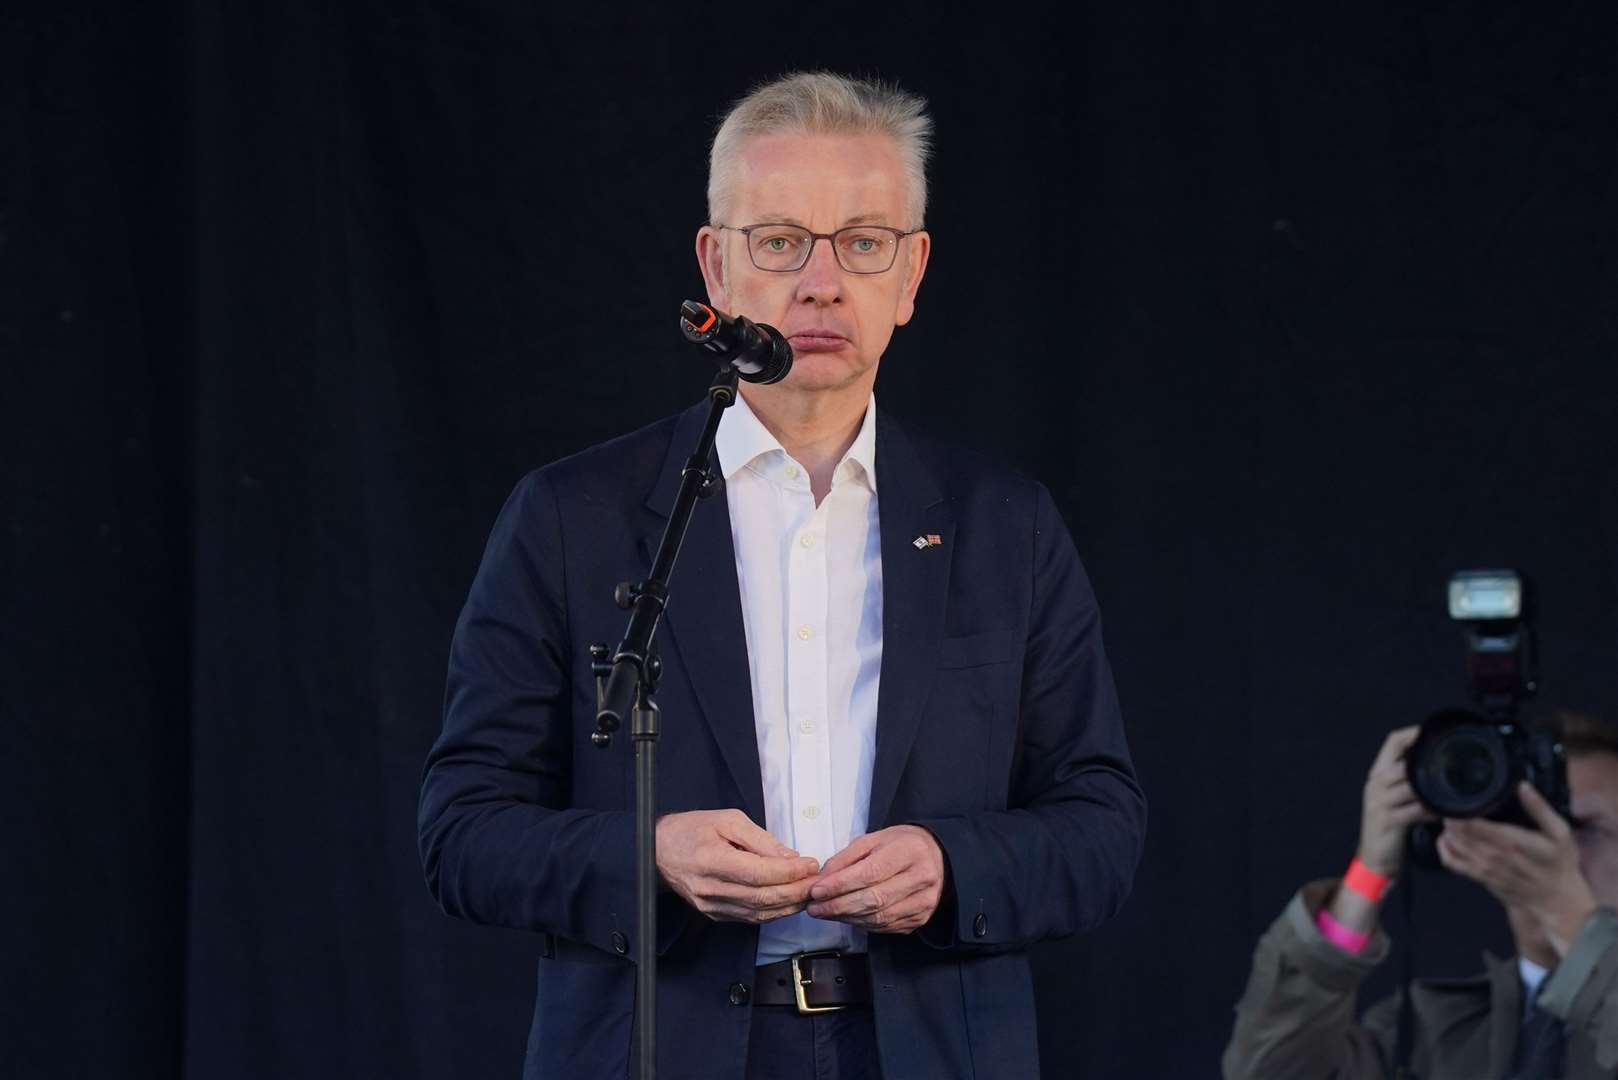 Michael Gove addressed the rally in central London (Lucy North/PA)